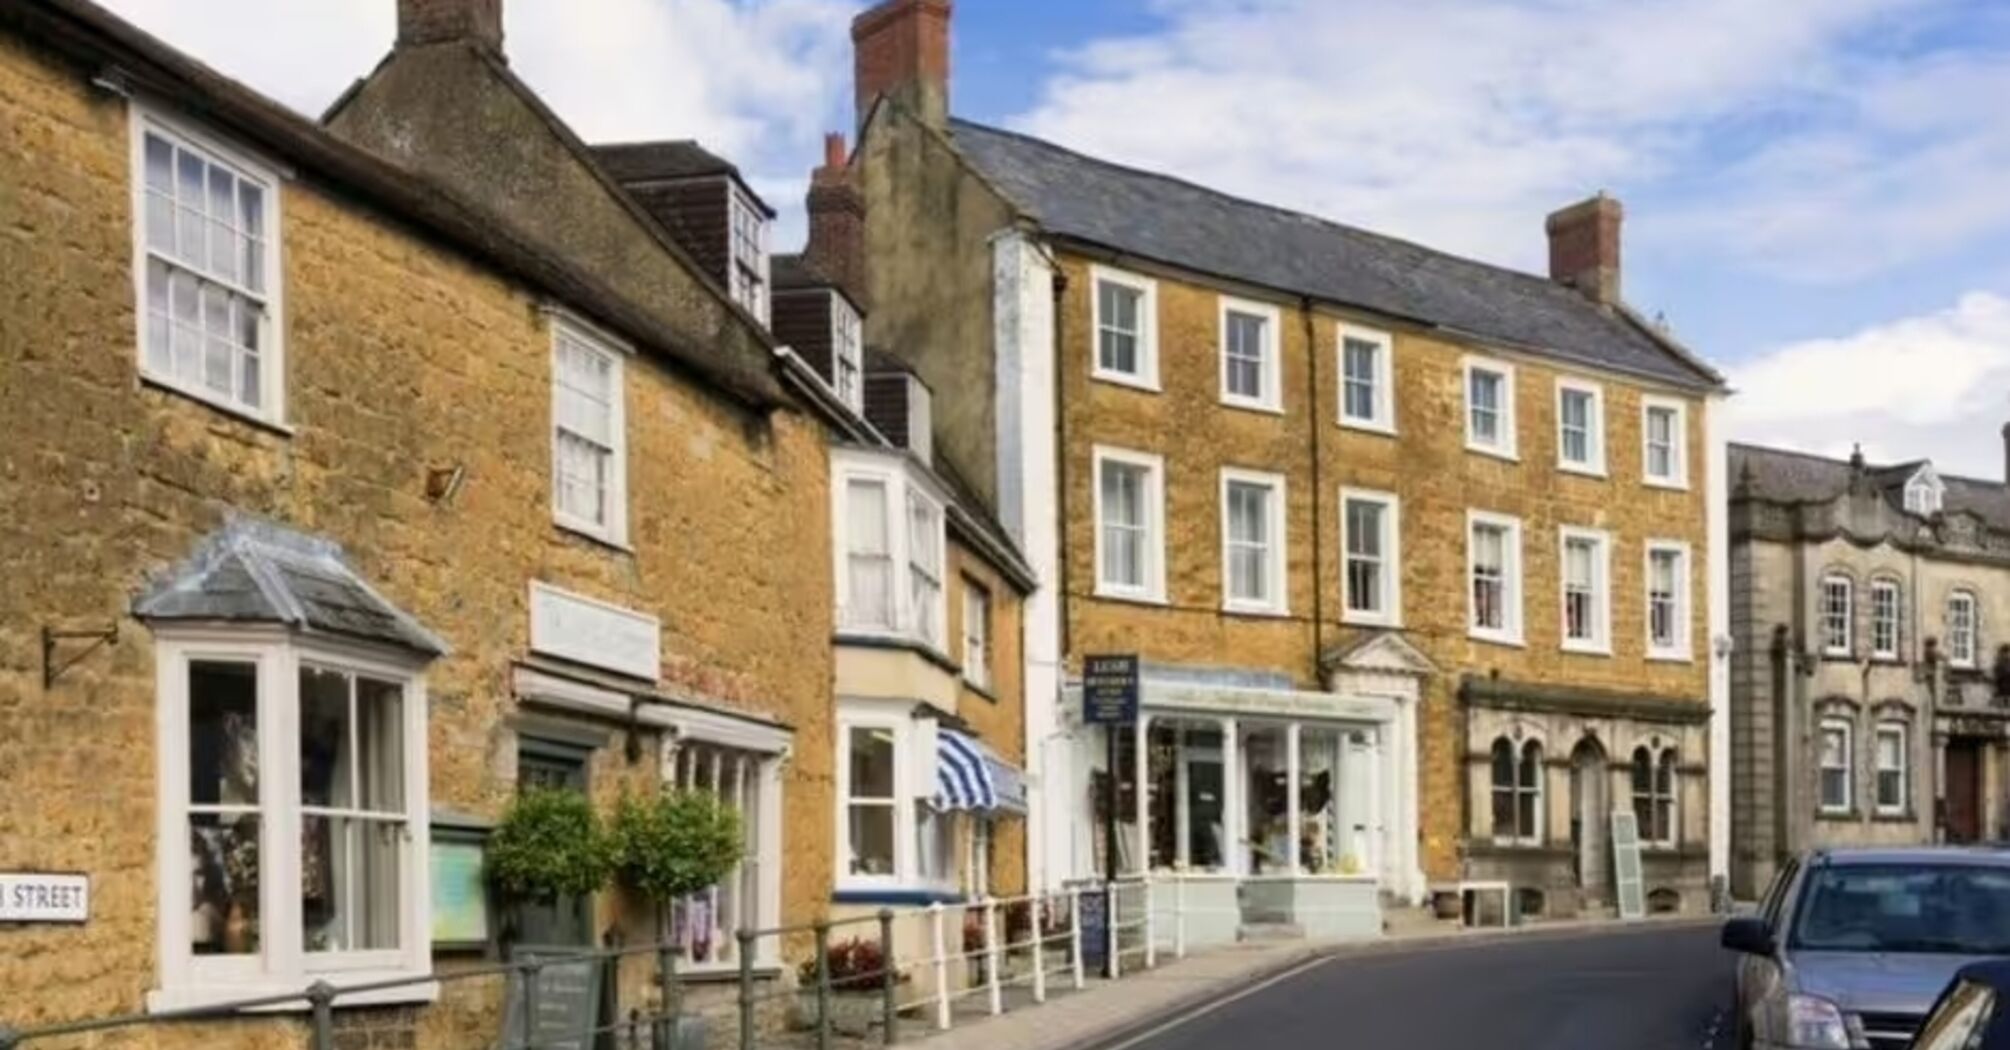 Ancient architecture and attractive property prices: a beautiful town near London, which is perfect for suburban trips